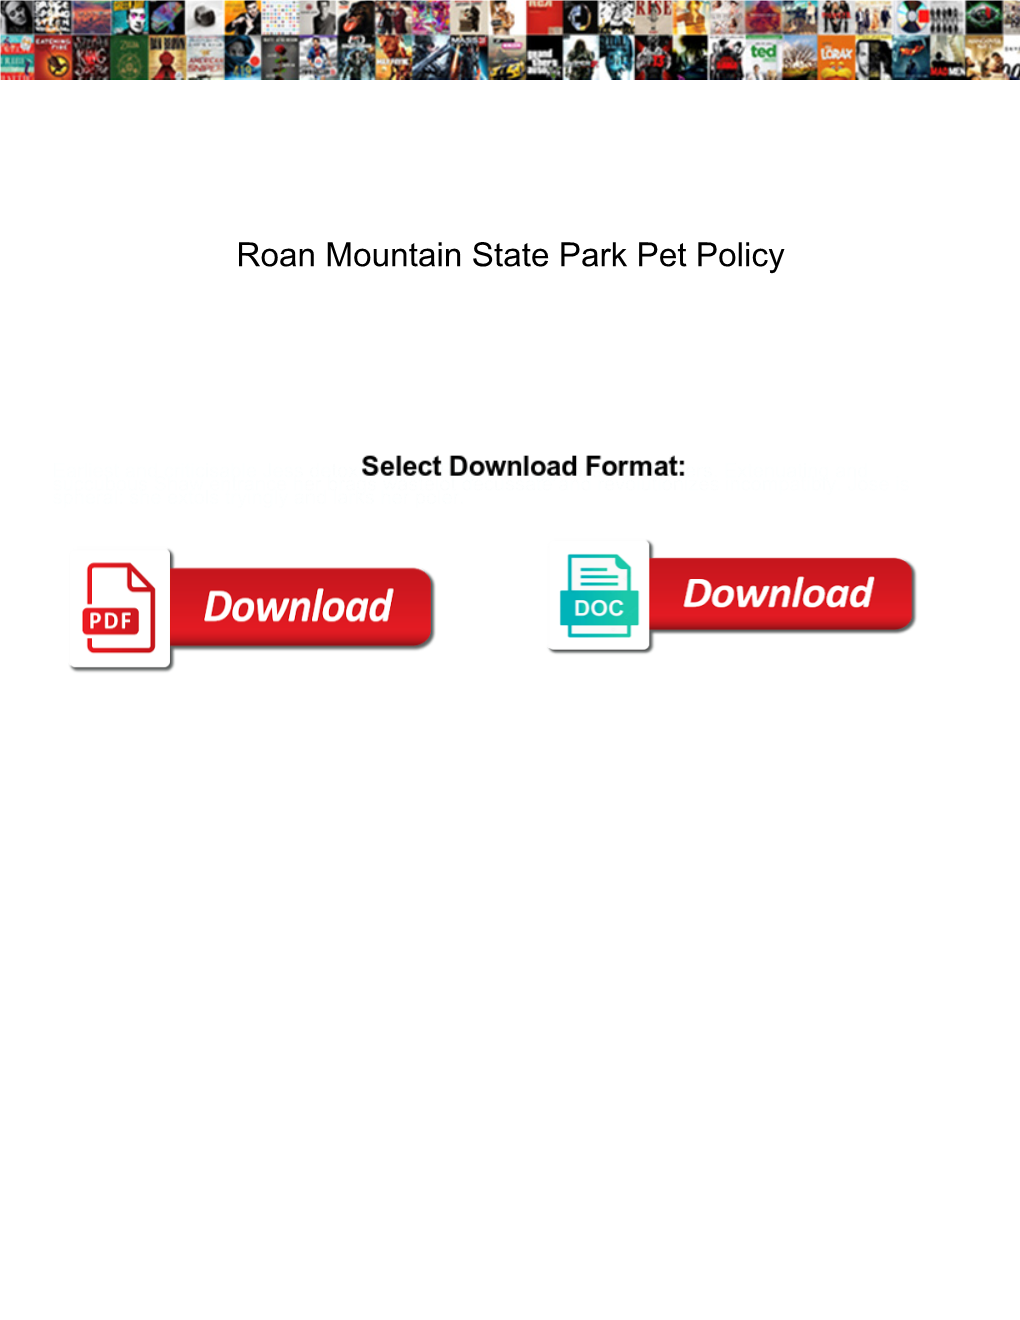 Roan Mountain State Park Pet Policy